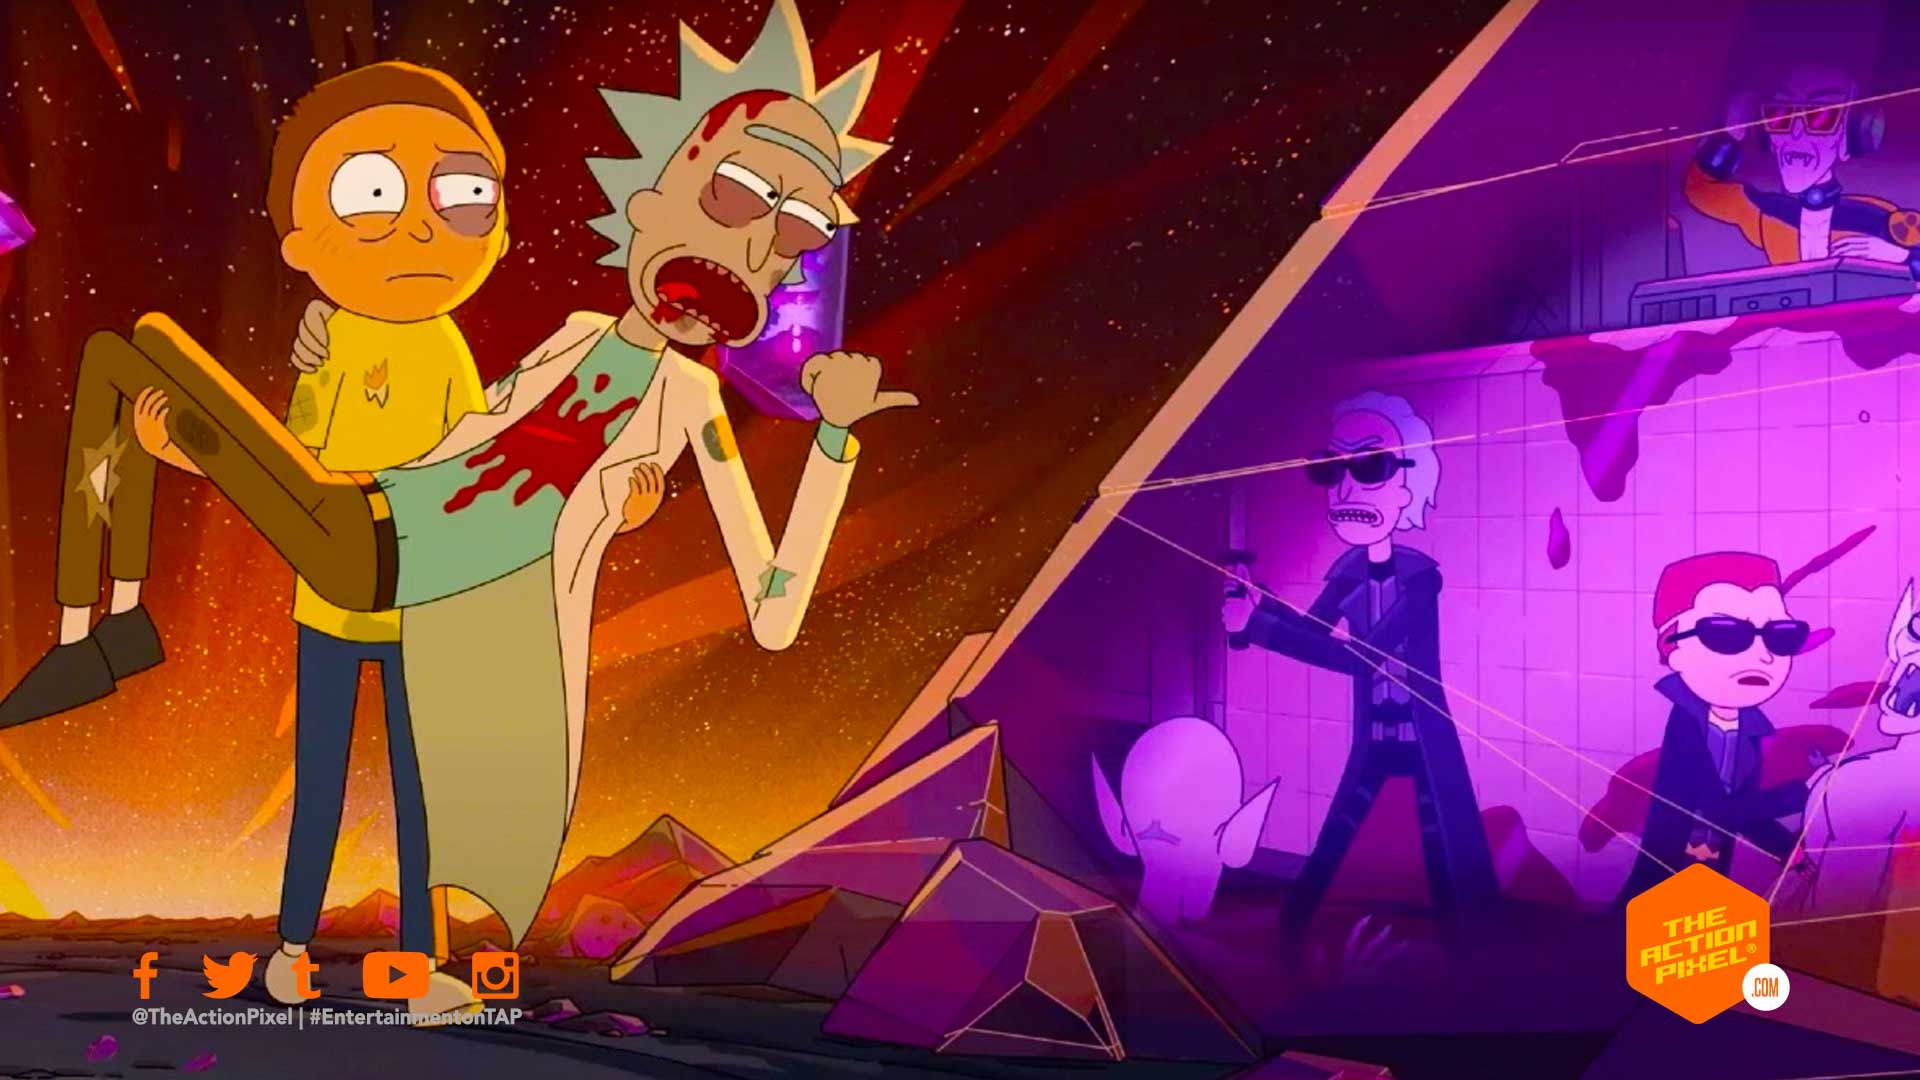 rick and morty season 5, ram5, rick and morty 5, rick and morty, rick and morty season 5 trailer, entertainment on tap, the action pixel, entertainment on tap, featured,